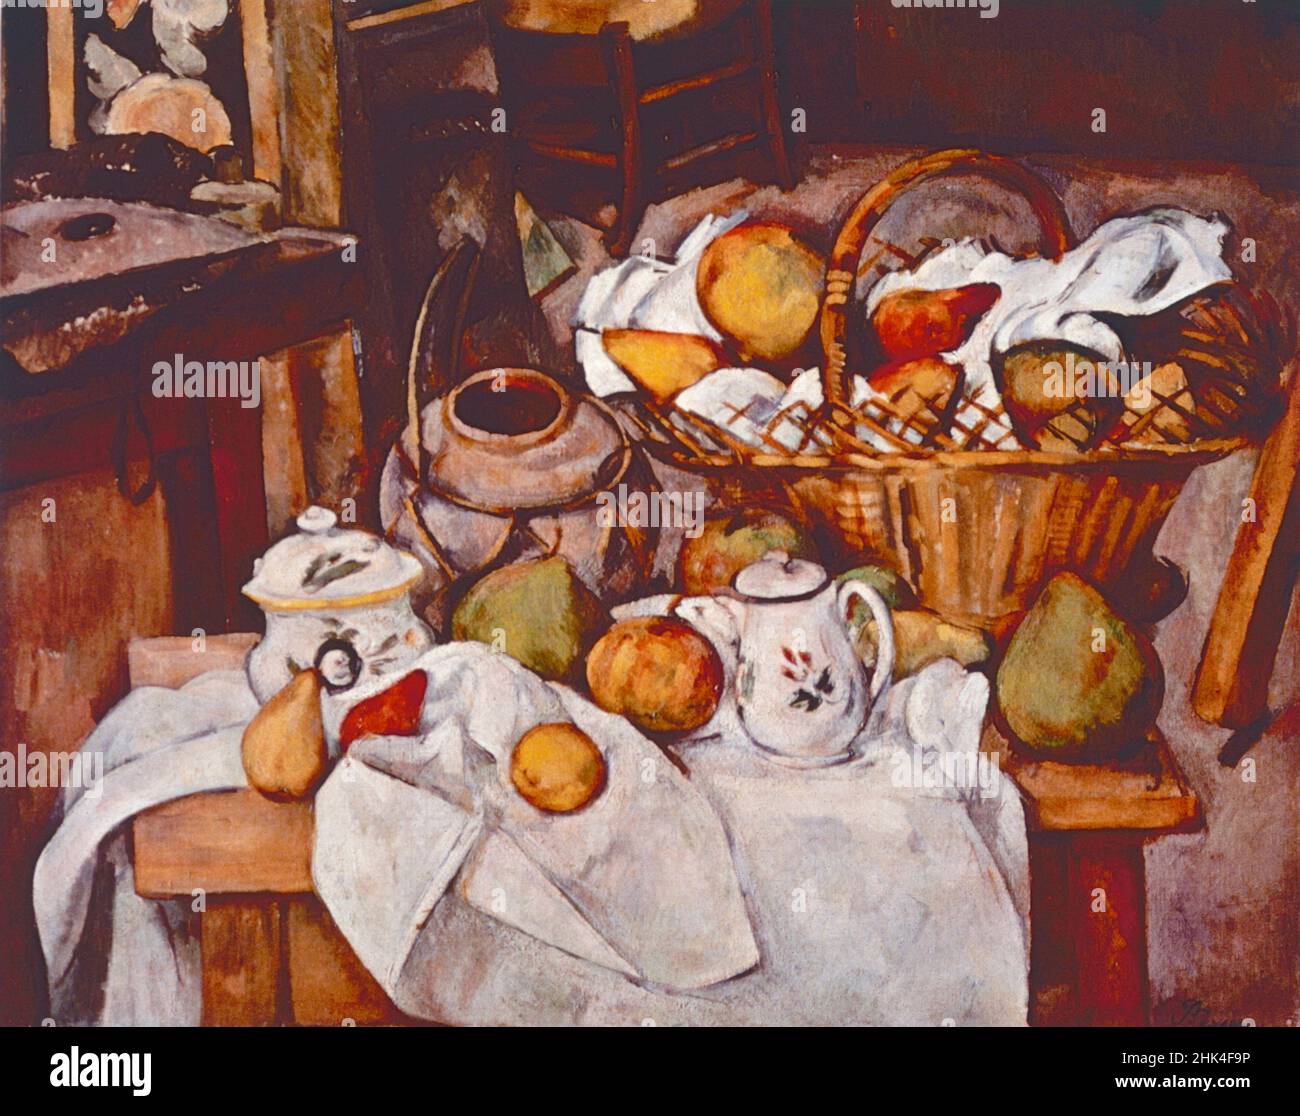 Still Life with Basket of Fruits, painting by French artist Paul Cezanne, 1870s Stock Photo